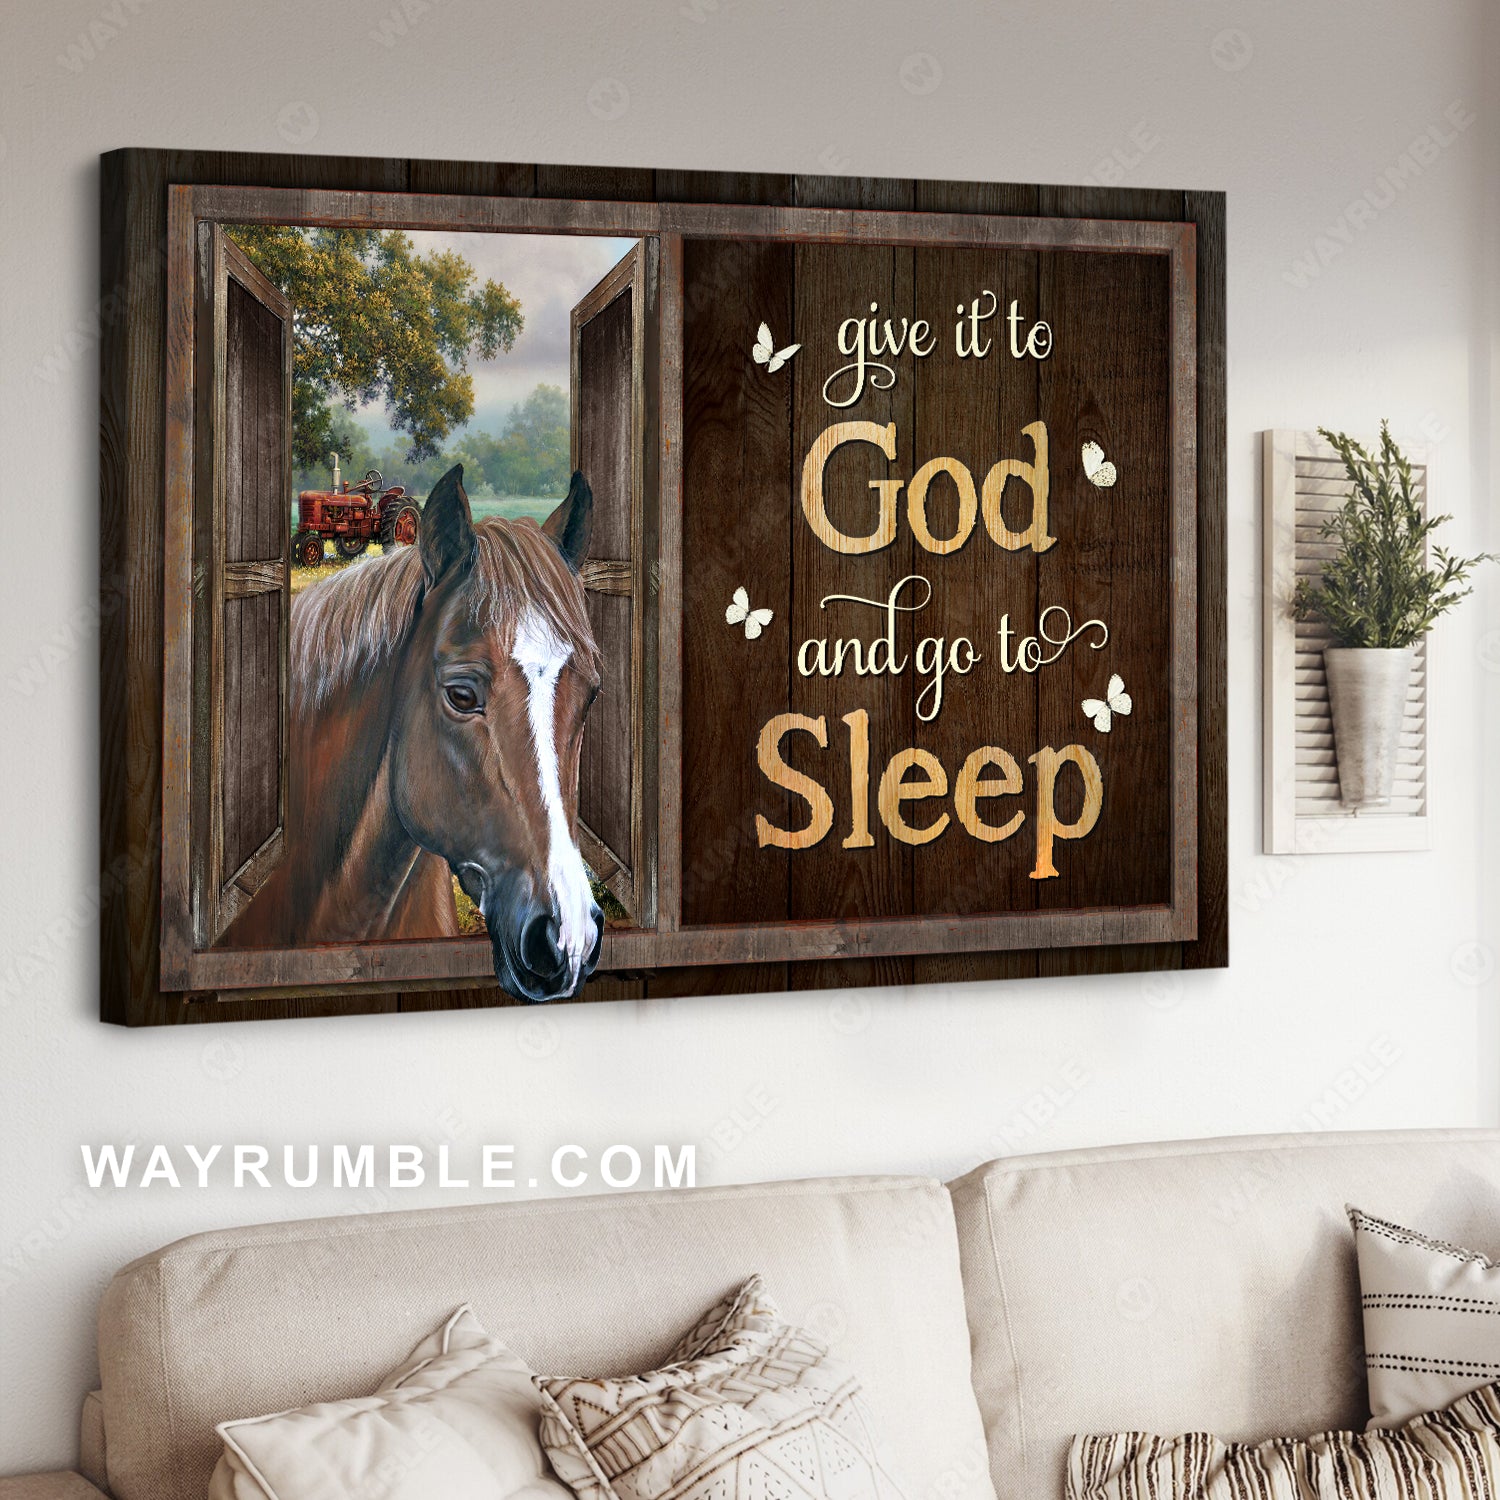 Brown horse, Wooden window, Give it to God and go to sleep - Jesus Landscape Canvas Prints, Christian Wall Art